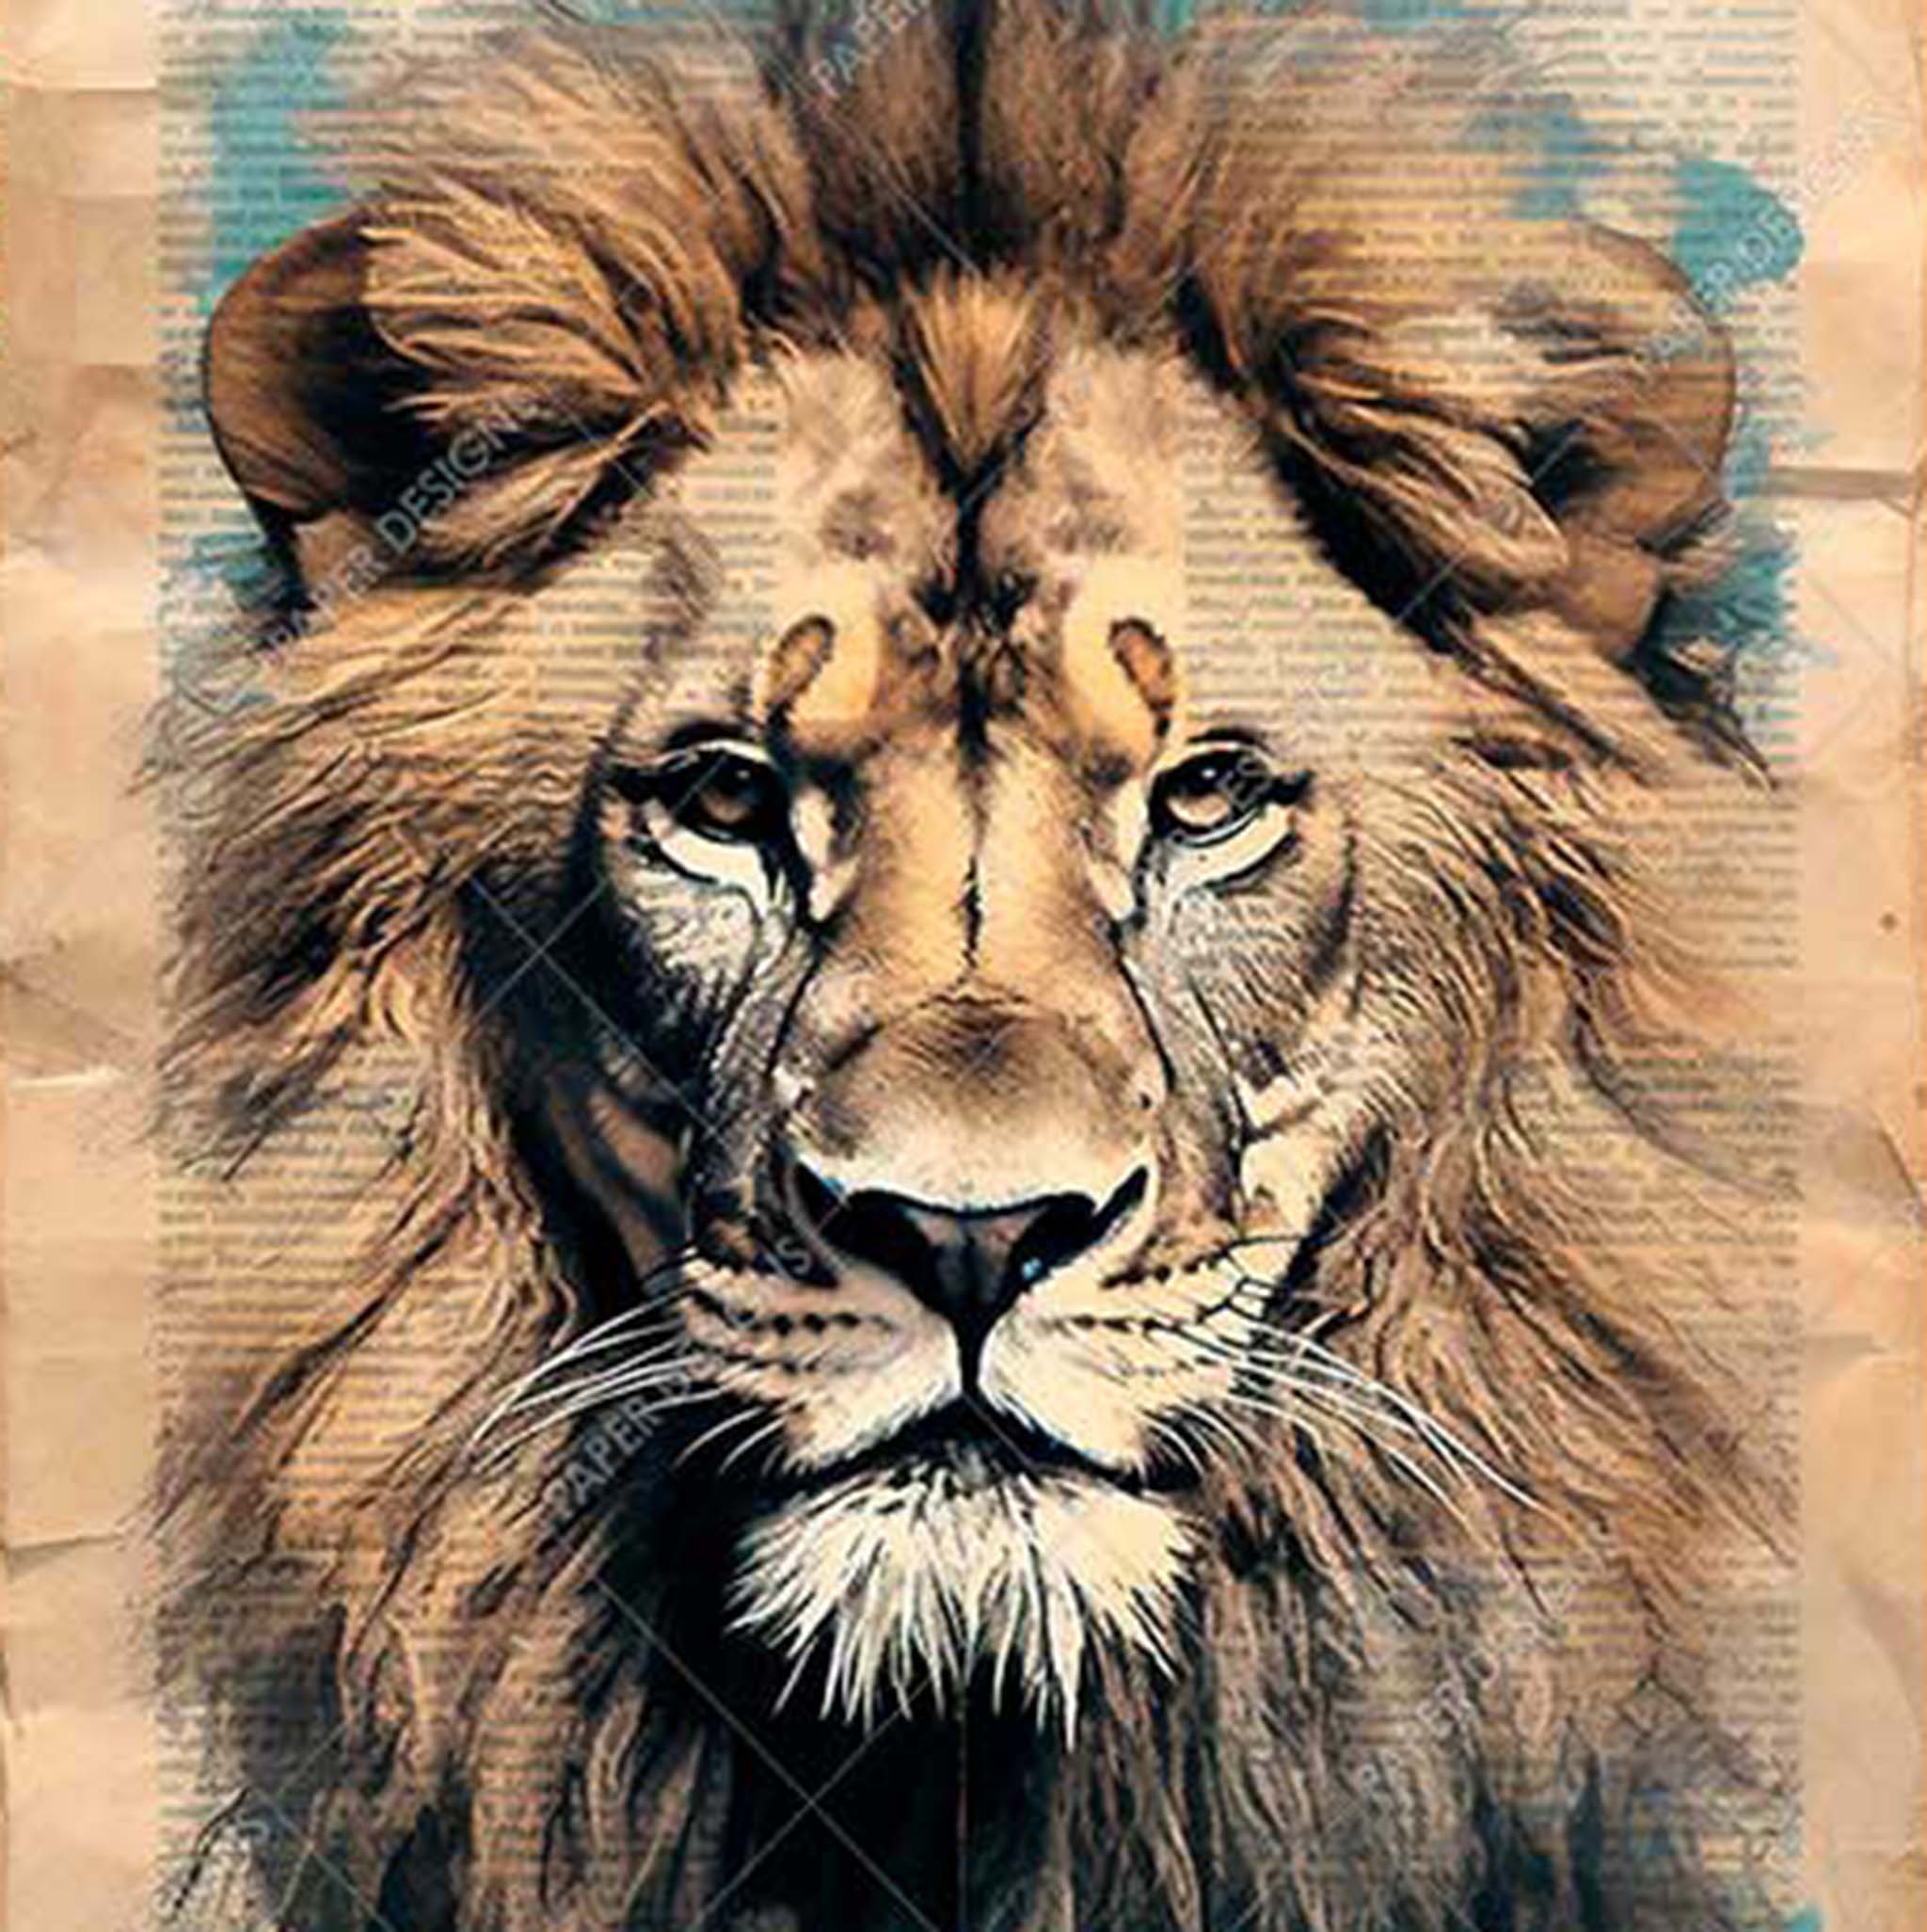 A2 rice paper design that features a vintage sepia tone background and a majestic lion.